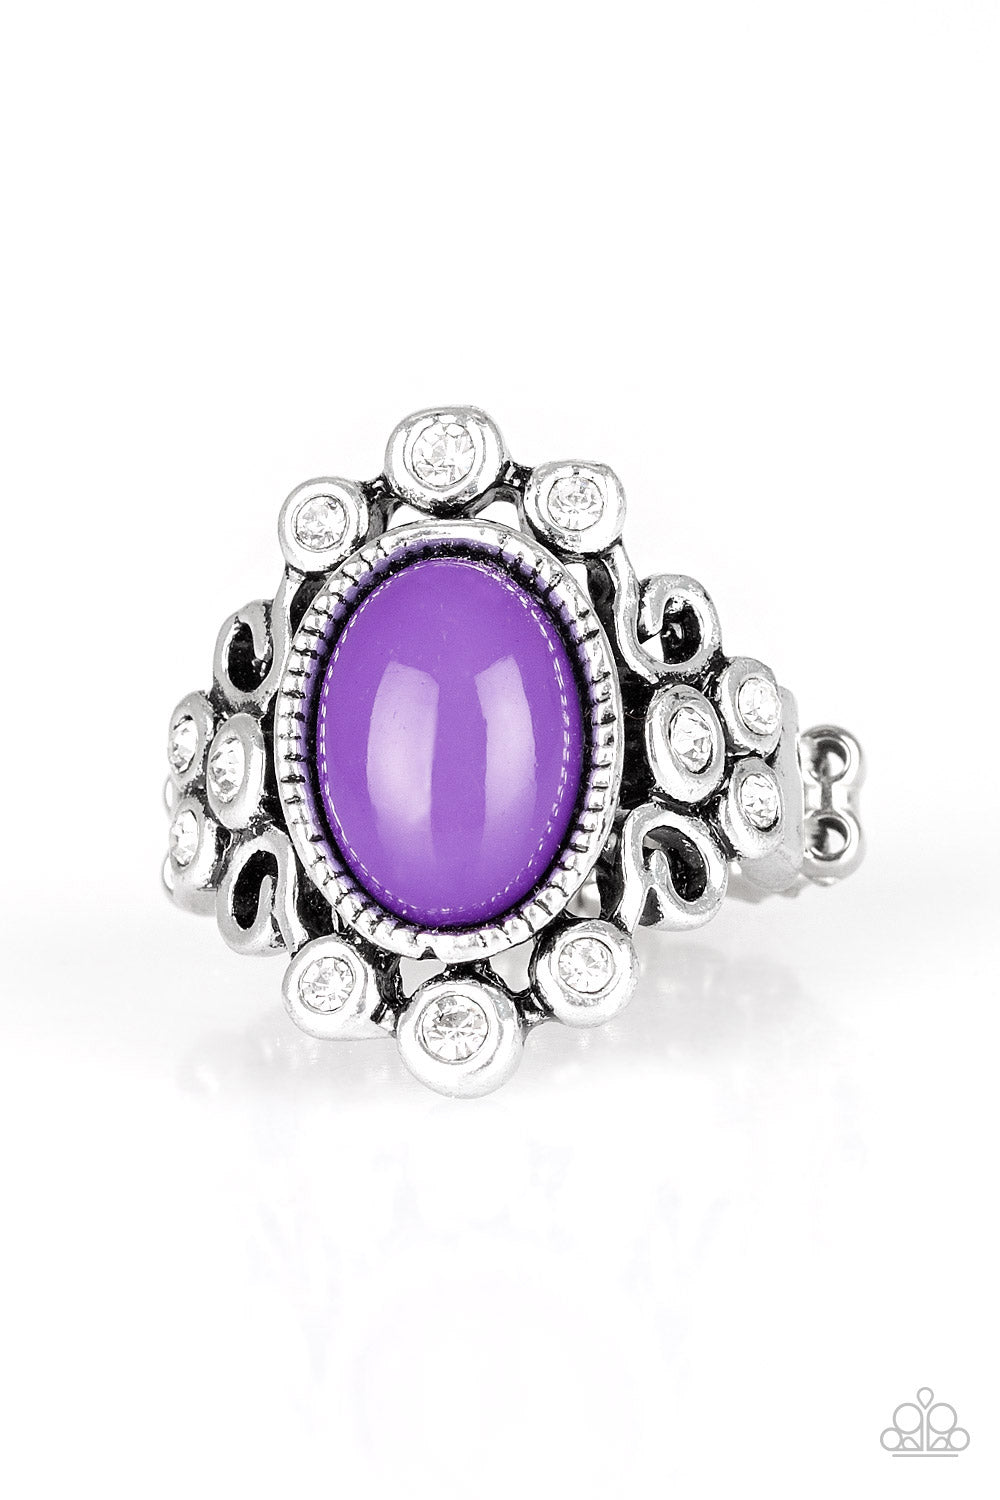 Noticeably Notable - Purple Paparazzi Ring